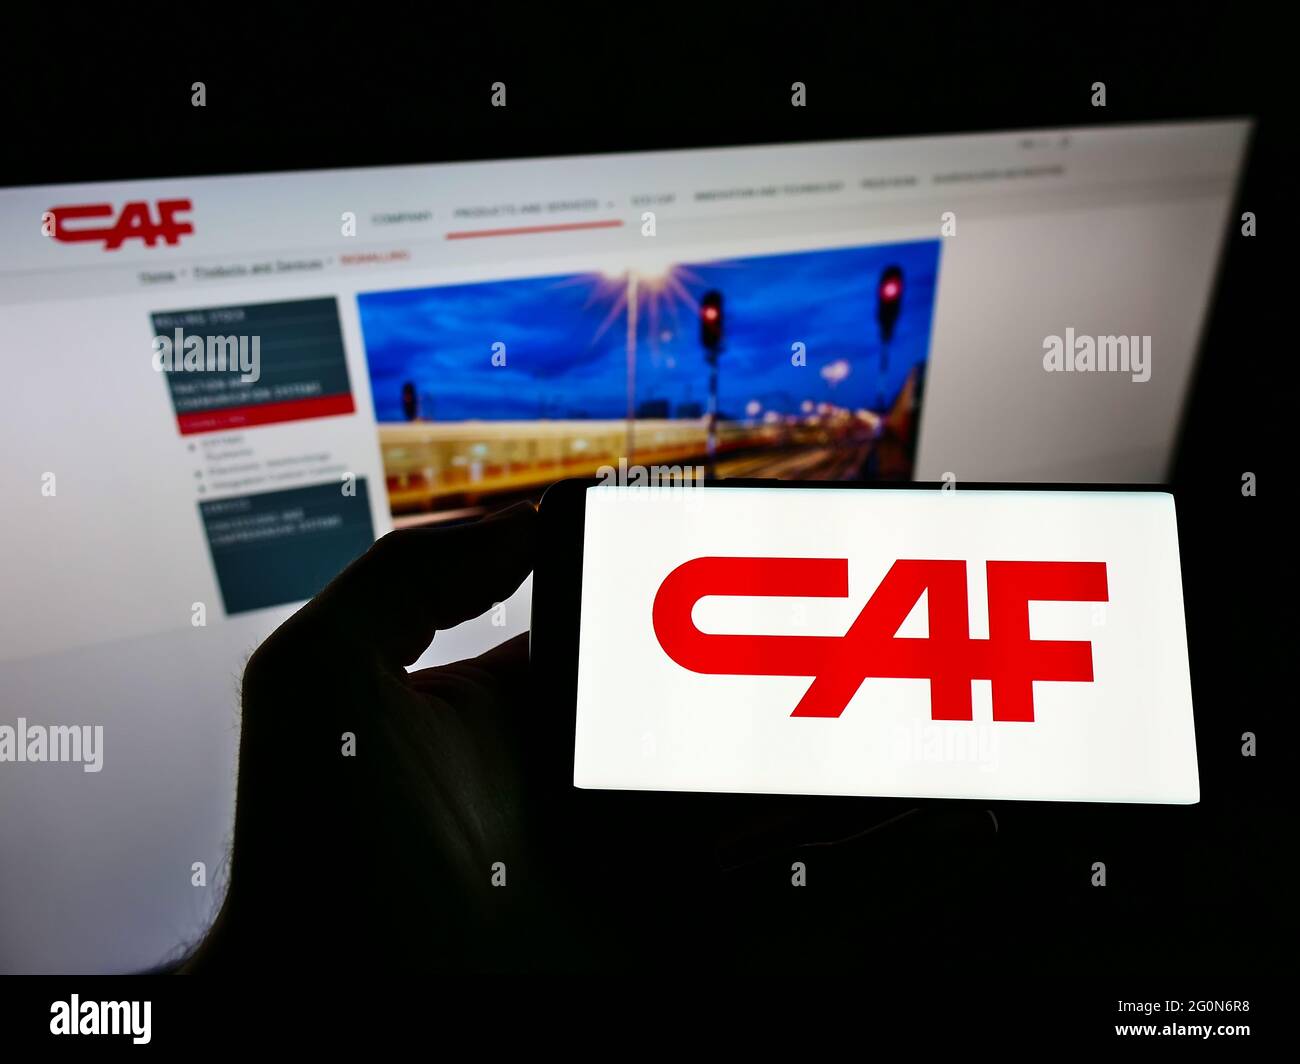 Person holding cellphone with logo of Construcciones y Auxiliar de Ferrocarriles S.A. (CAF) on screen in front of web page. Focus on phone display. Stock Photo